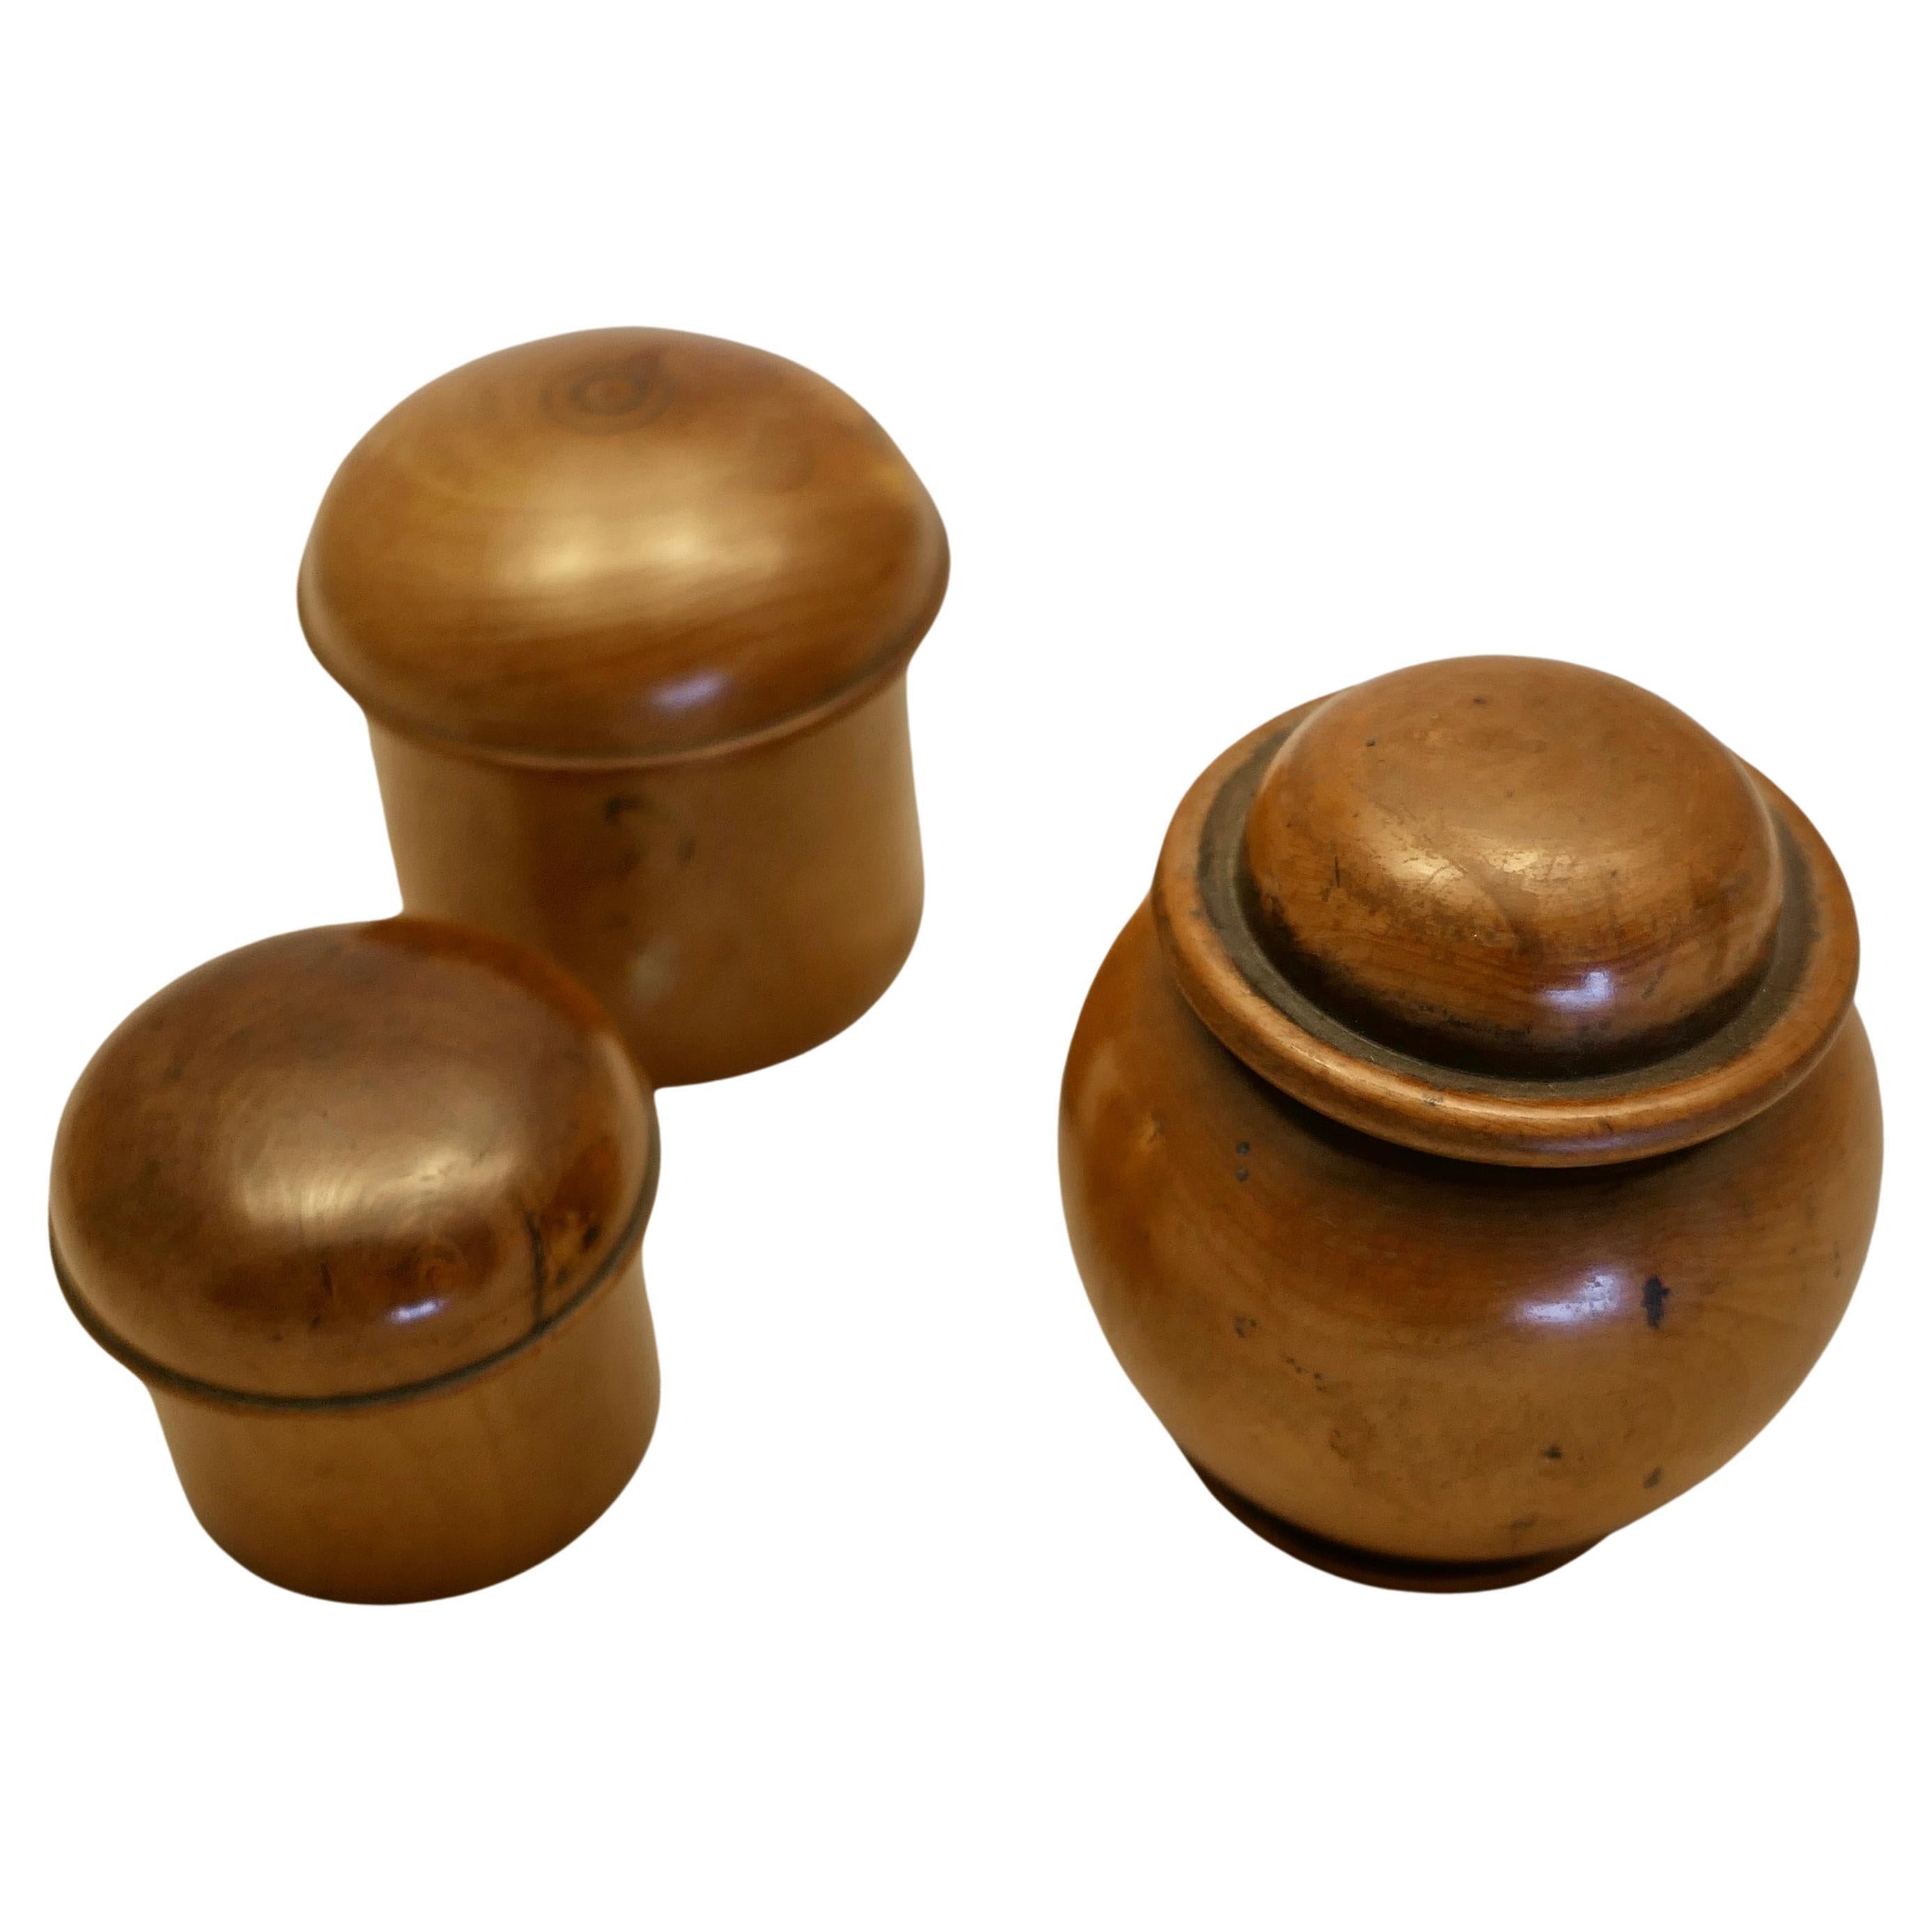 3 Hand Made Sycamore Treen Pots with Lids  The pots have a rich colour   For Sale